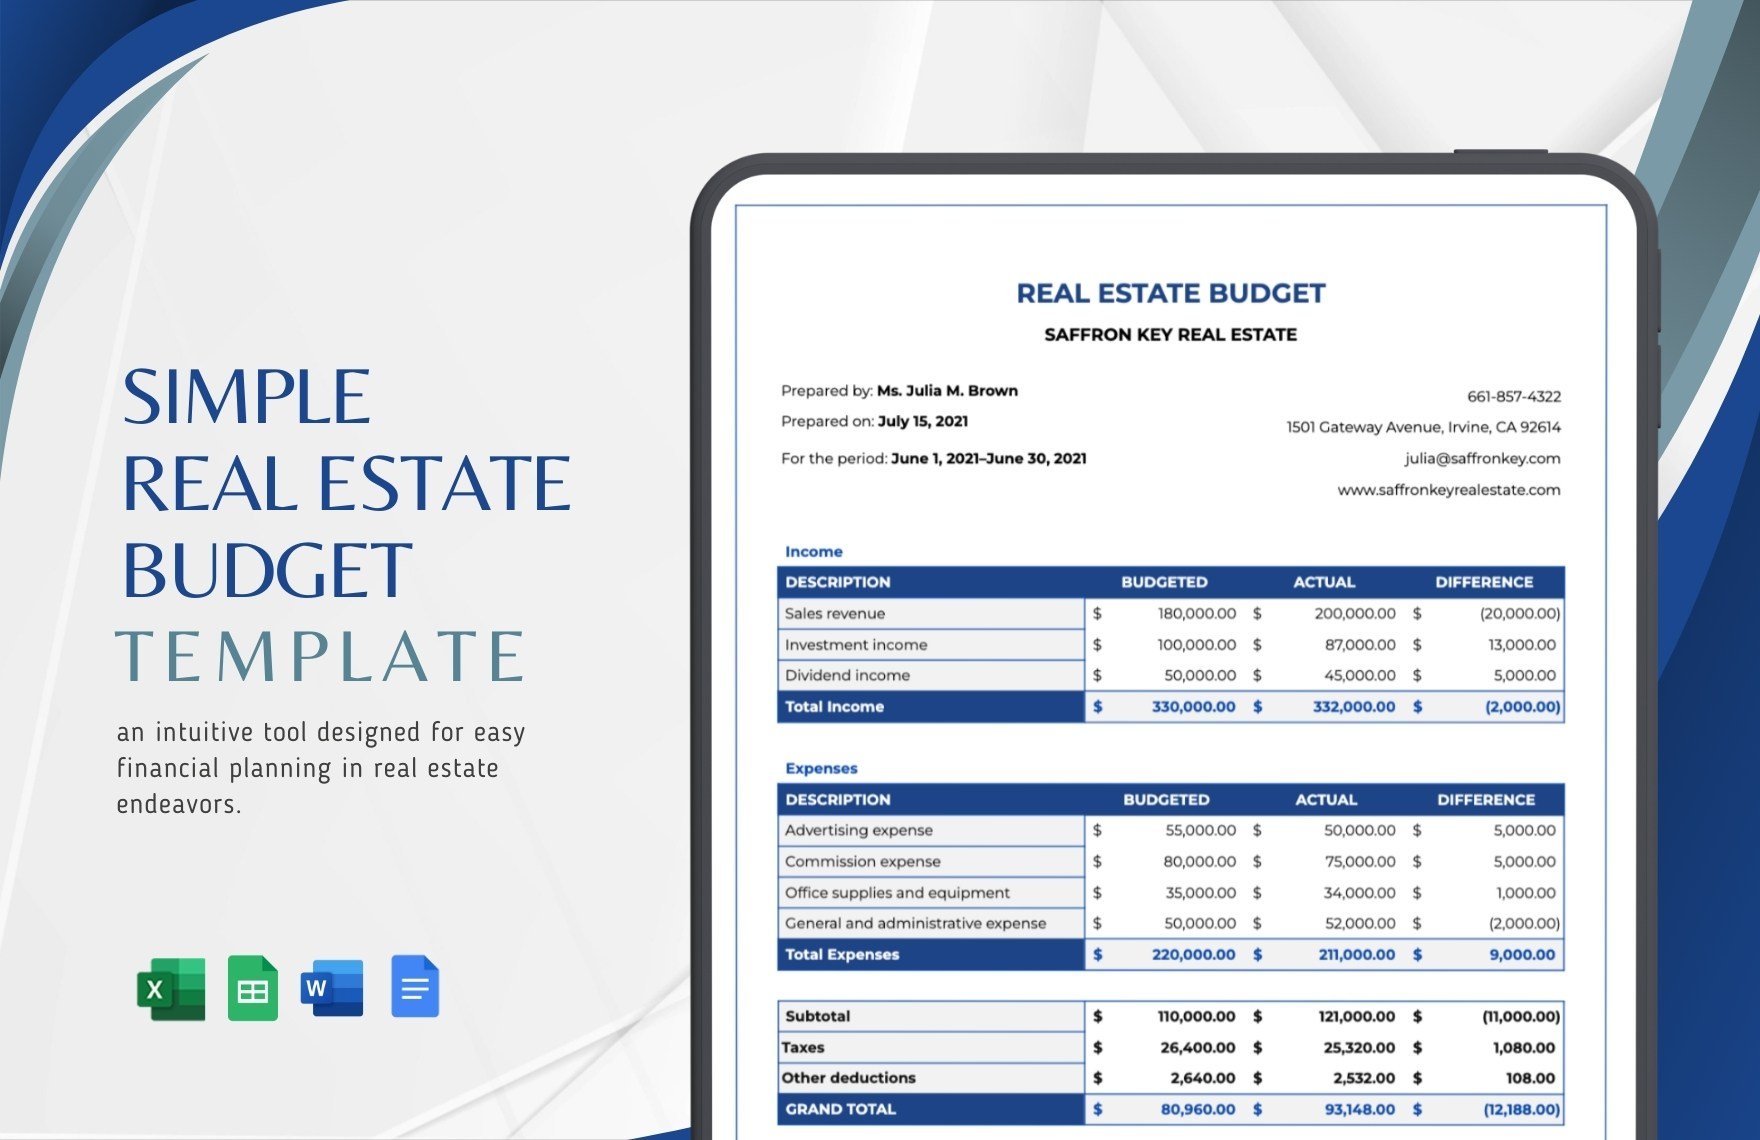 Simple Real Estate Budget Template in Word, Google Docs, Excel, Google Sheets